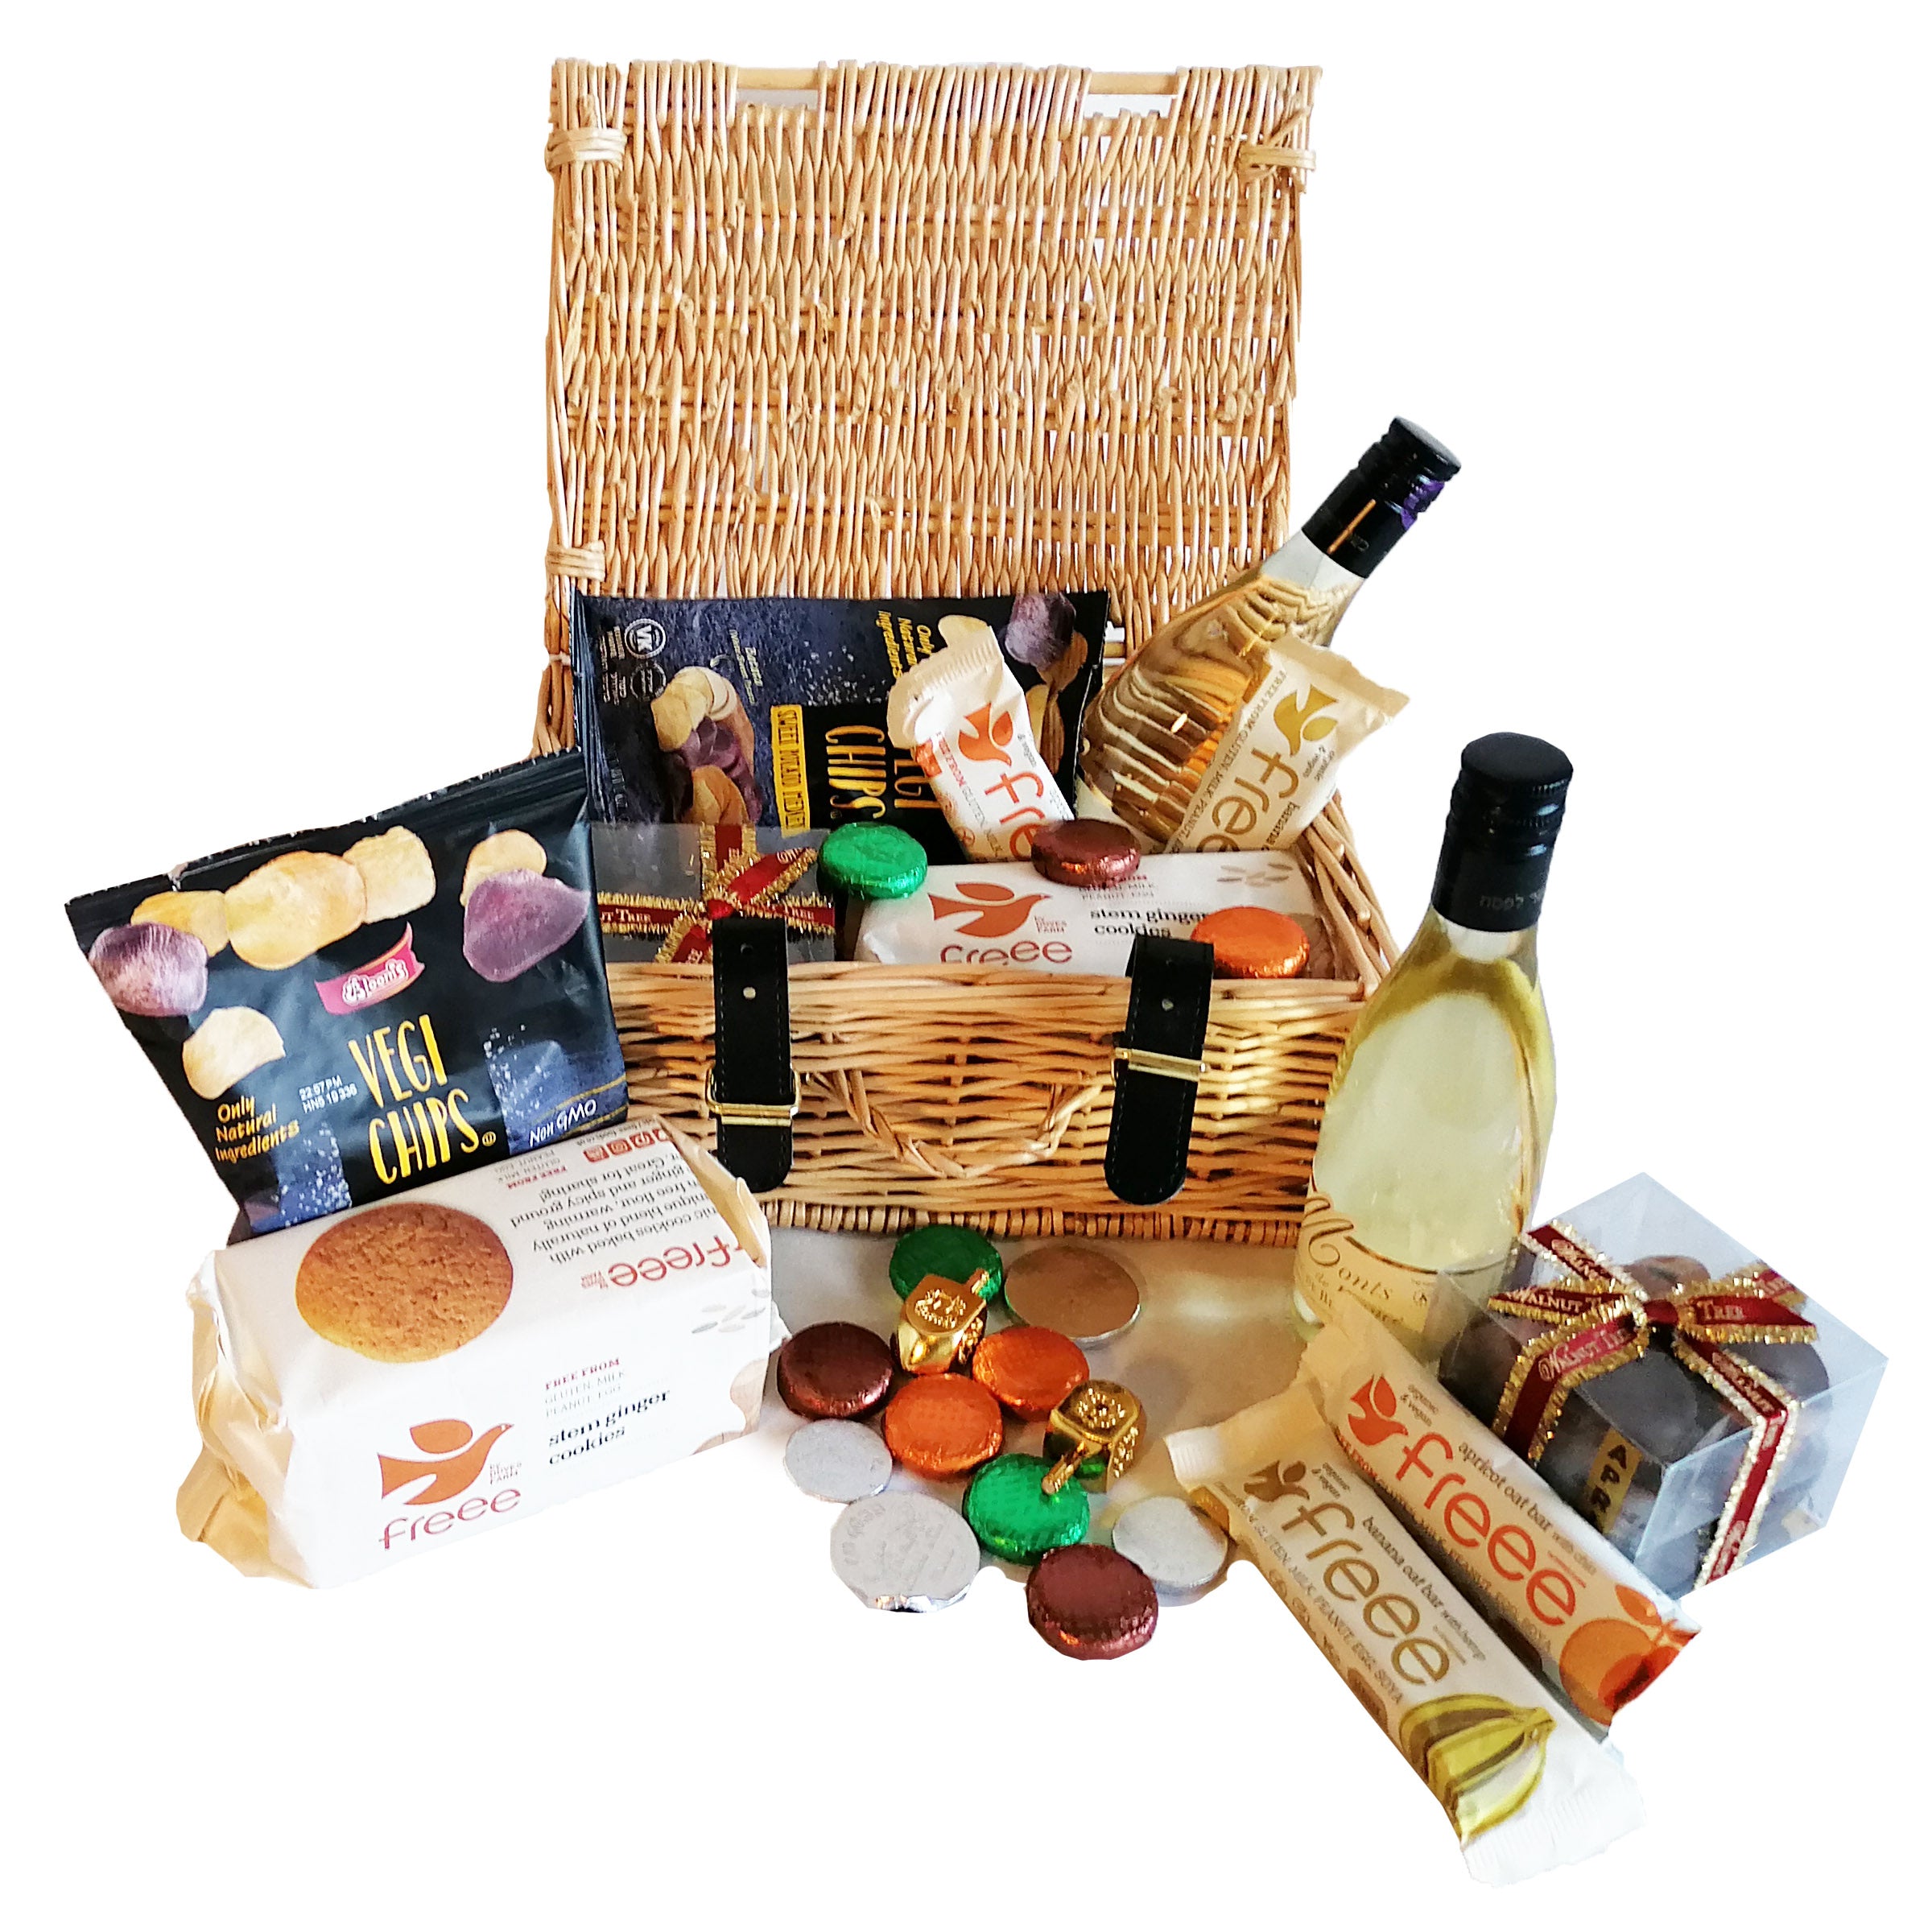 Kosher Gluten-Free and Vegan Hamper Gift To Show You Know Their Diet Matters To Them. Ideal For Purim And For Any Occasion.